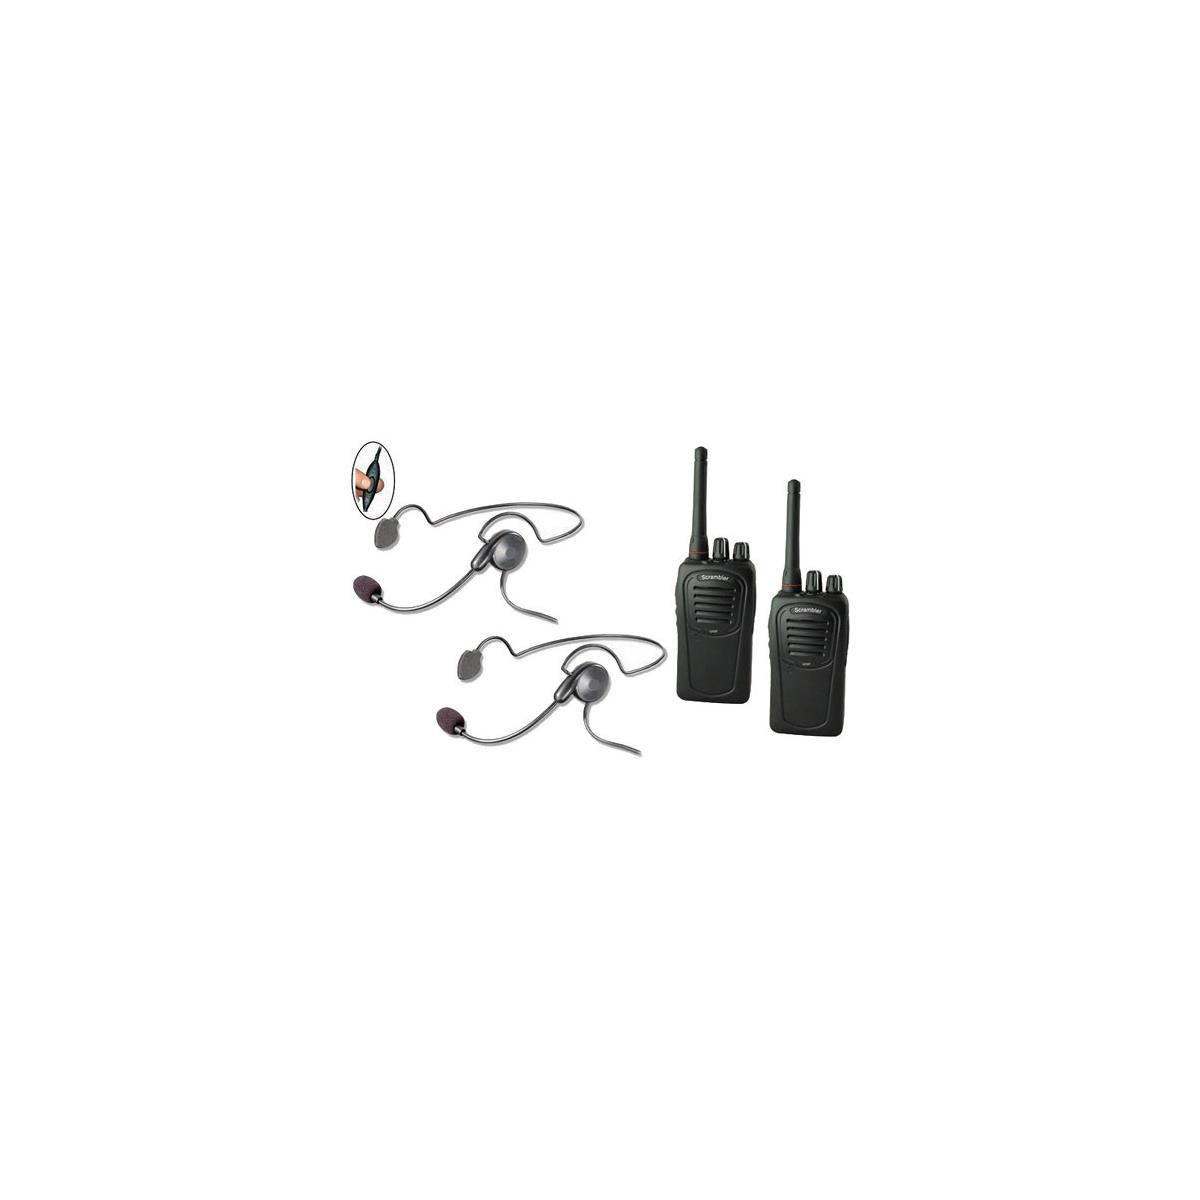 Image of Eartec SC-1000 2-User Two-Way Radio System with 2x Cyber Inline PTT Headsets